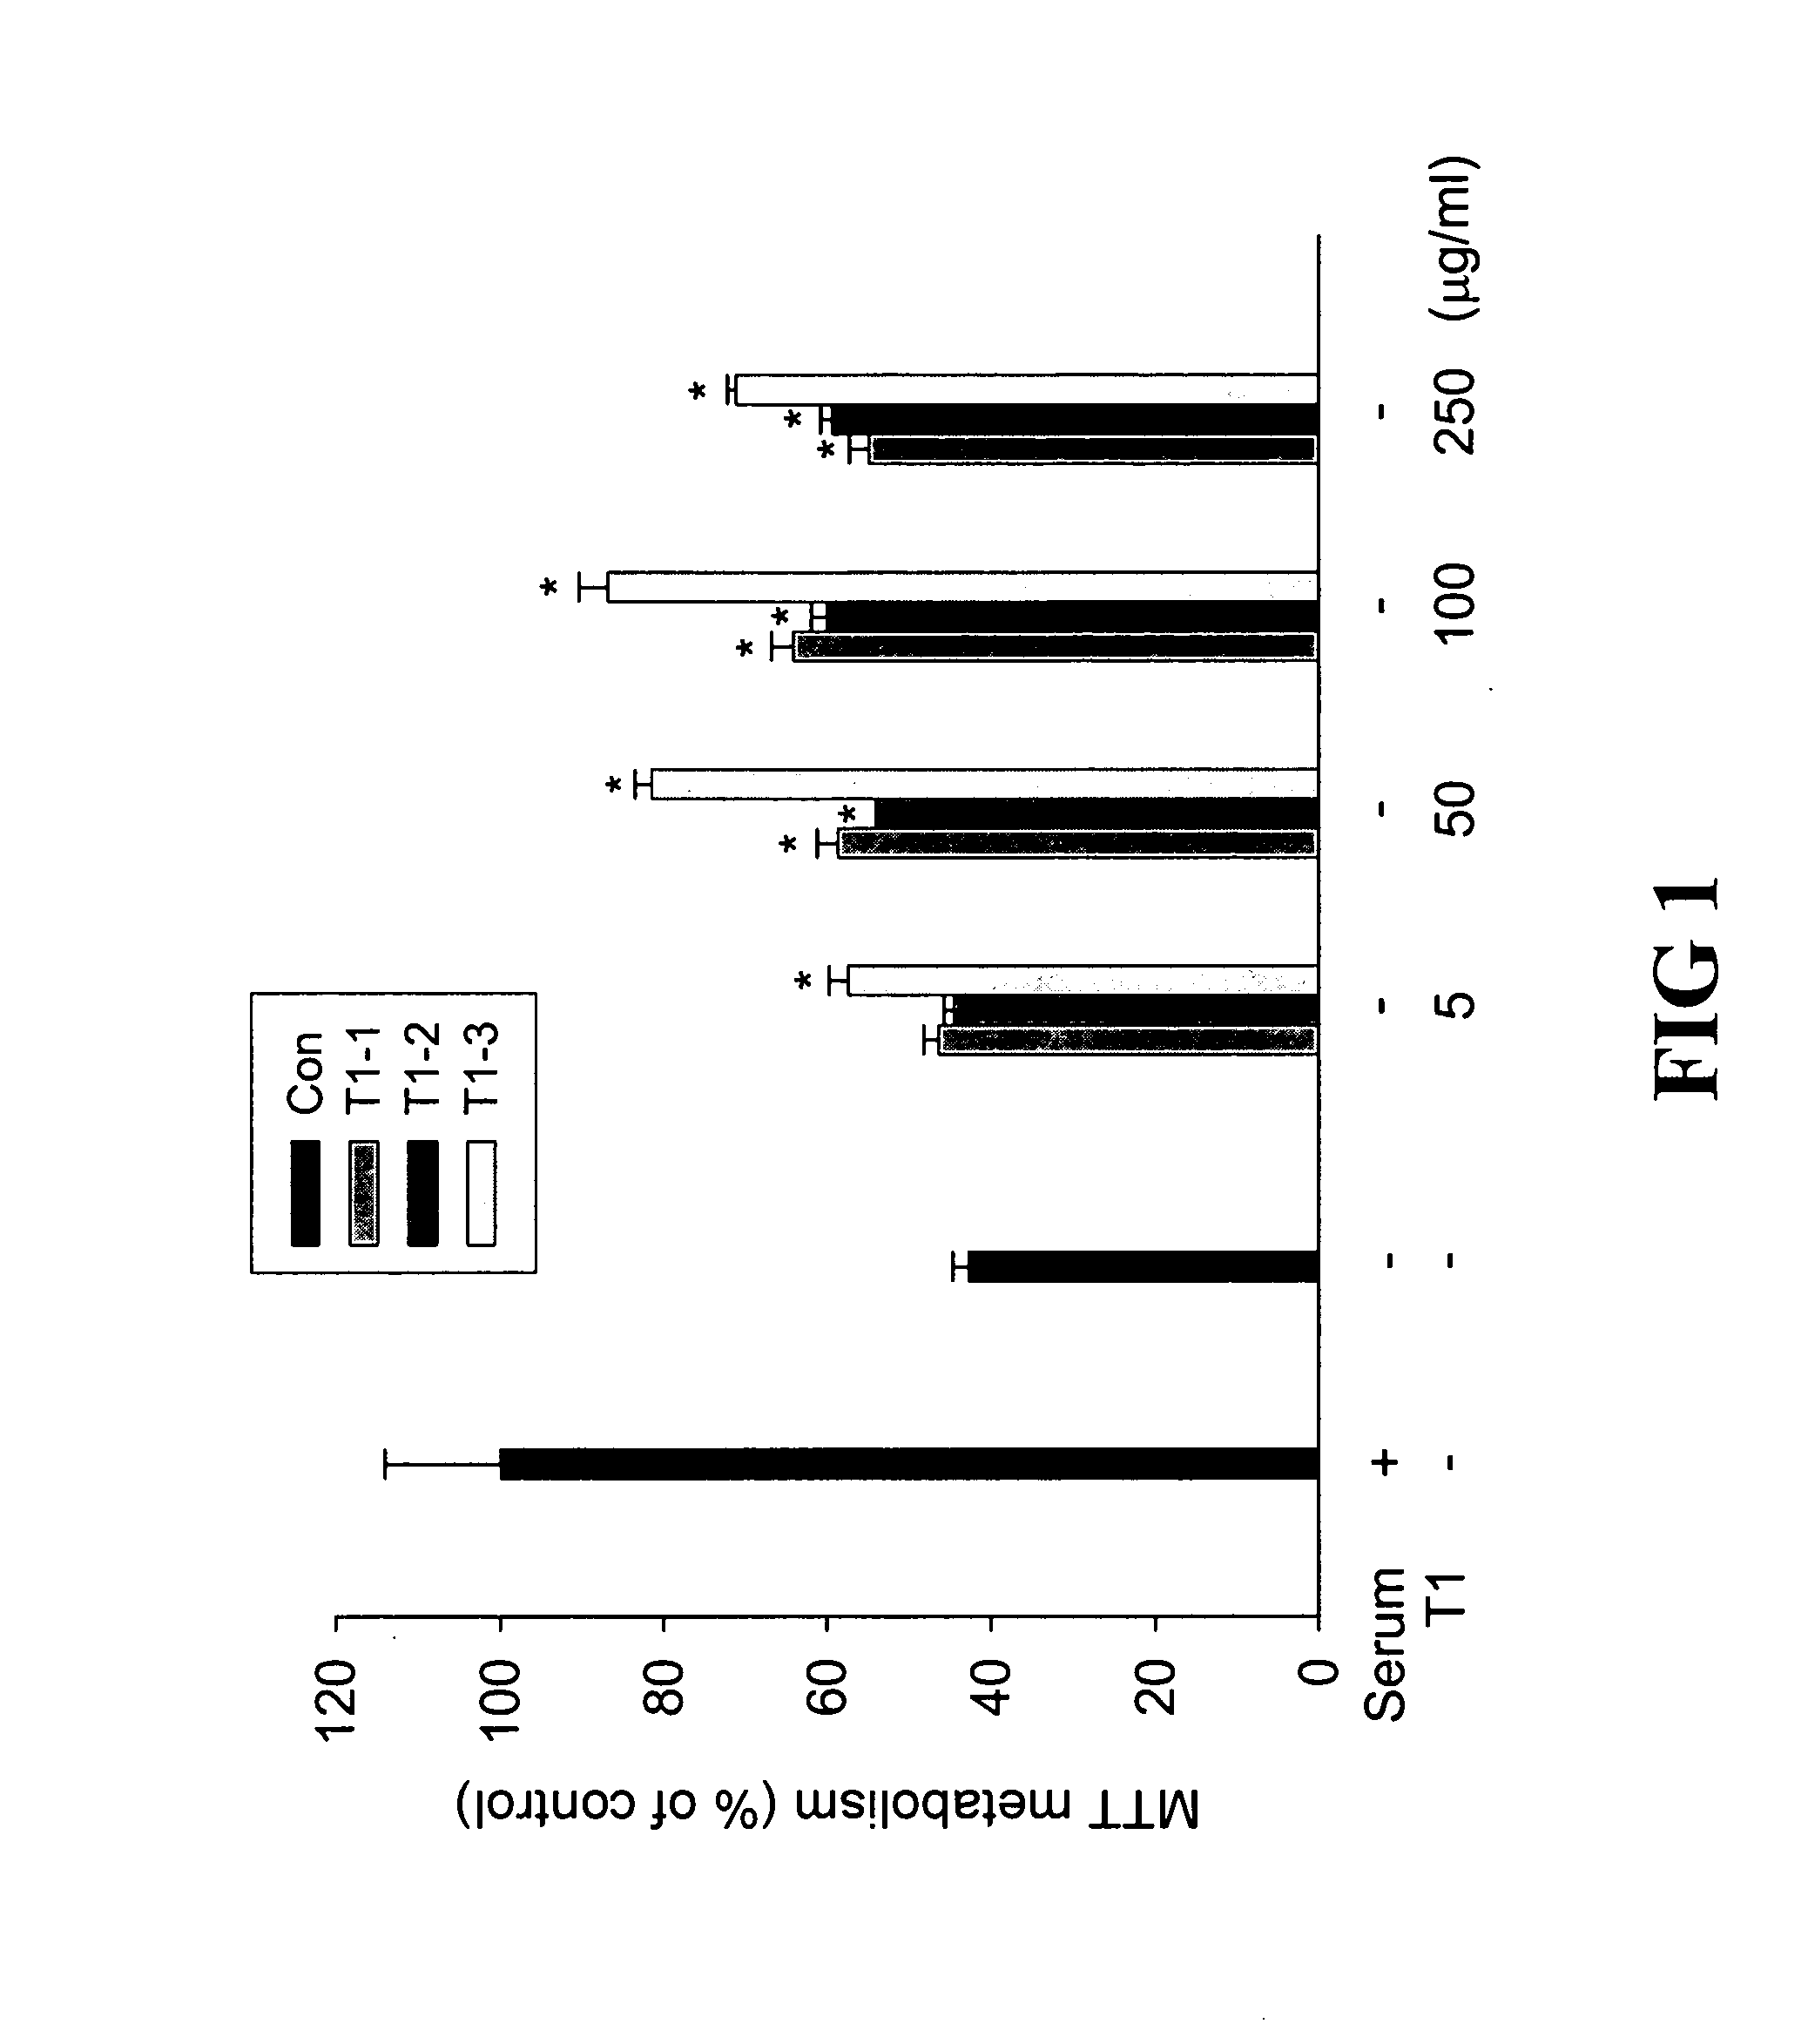 Method of making and using an adenosine analogue